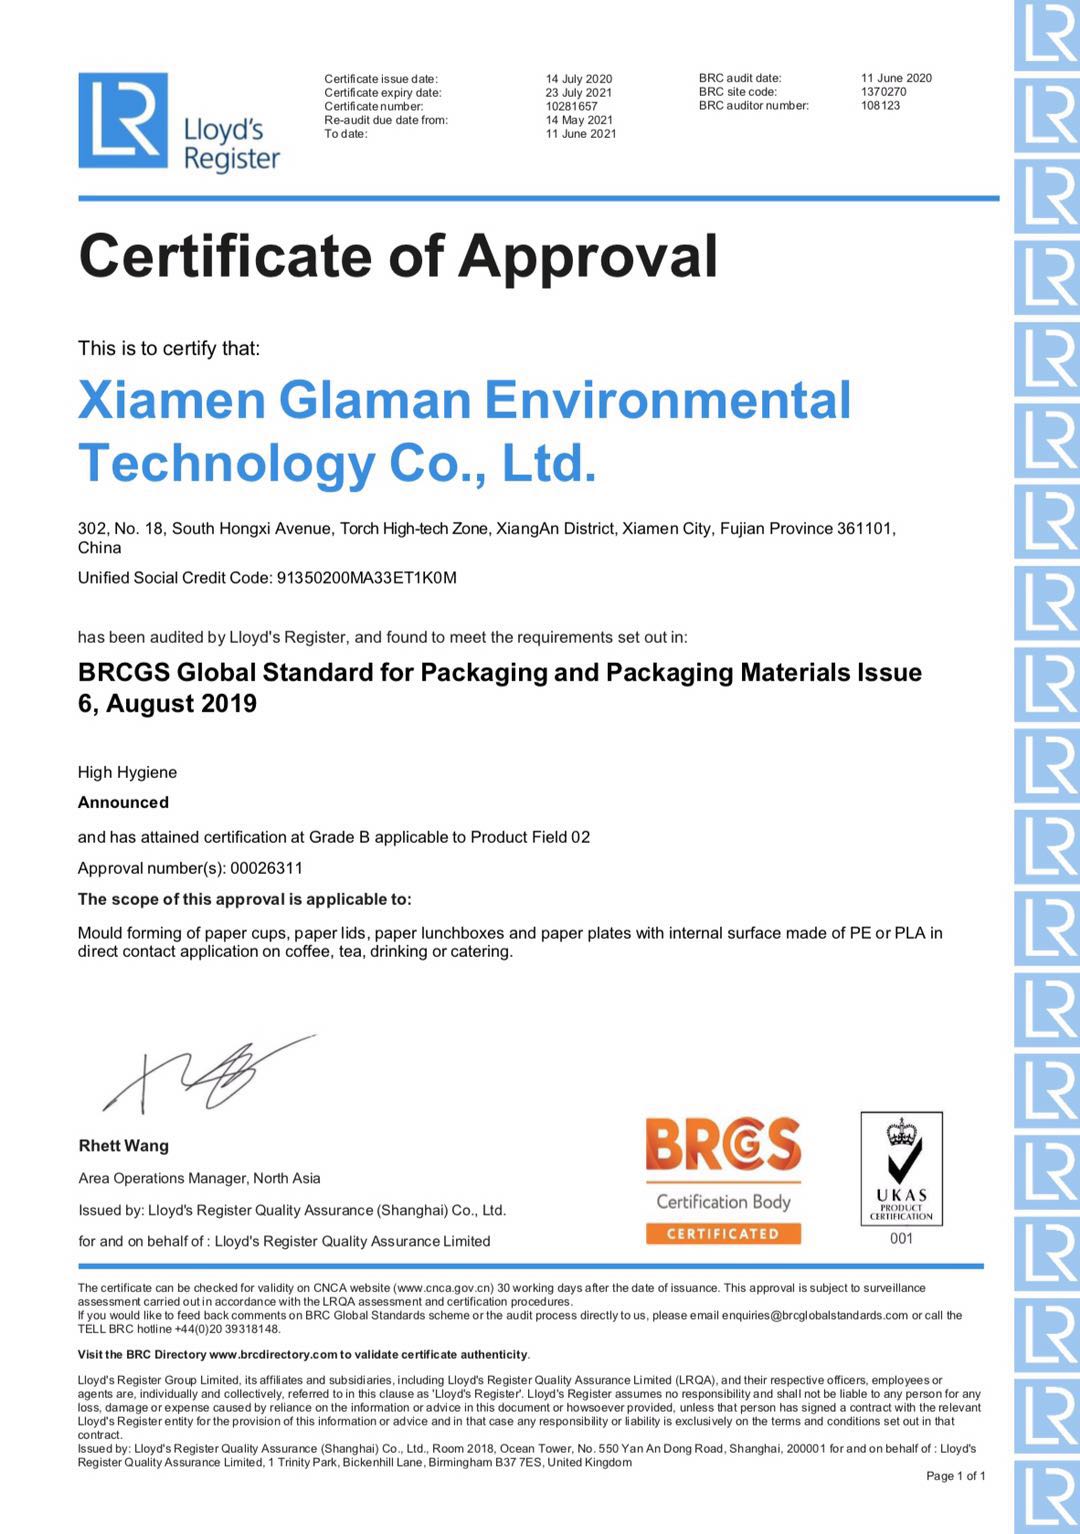 The certification of BRC